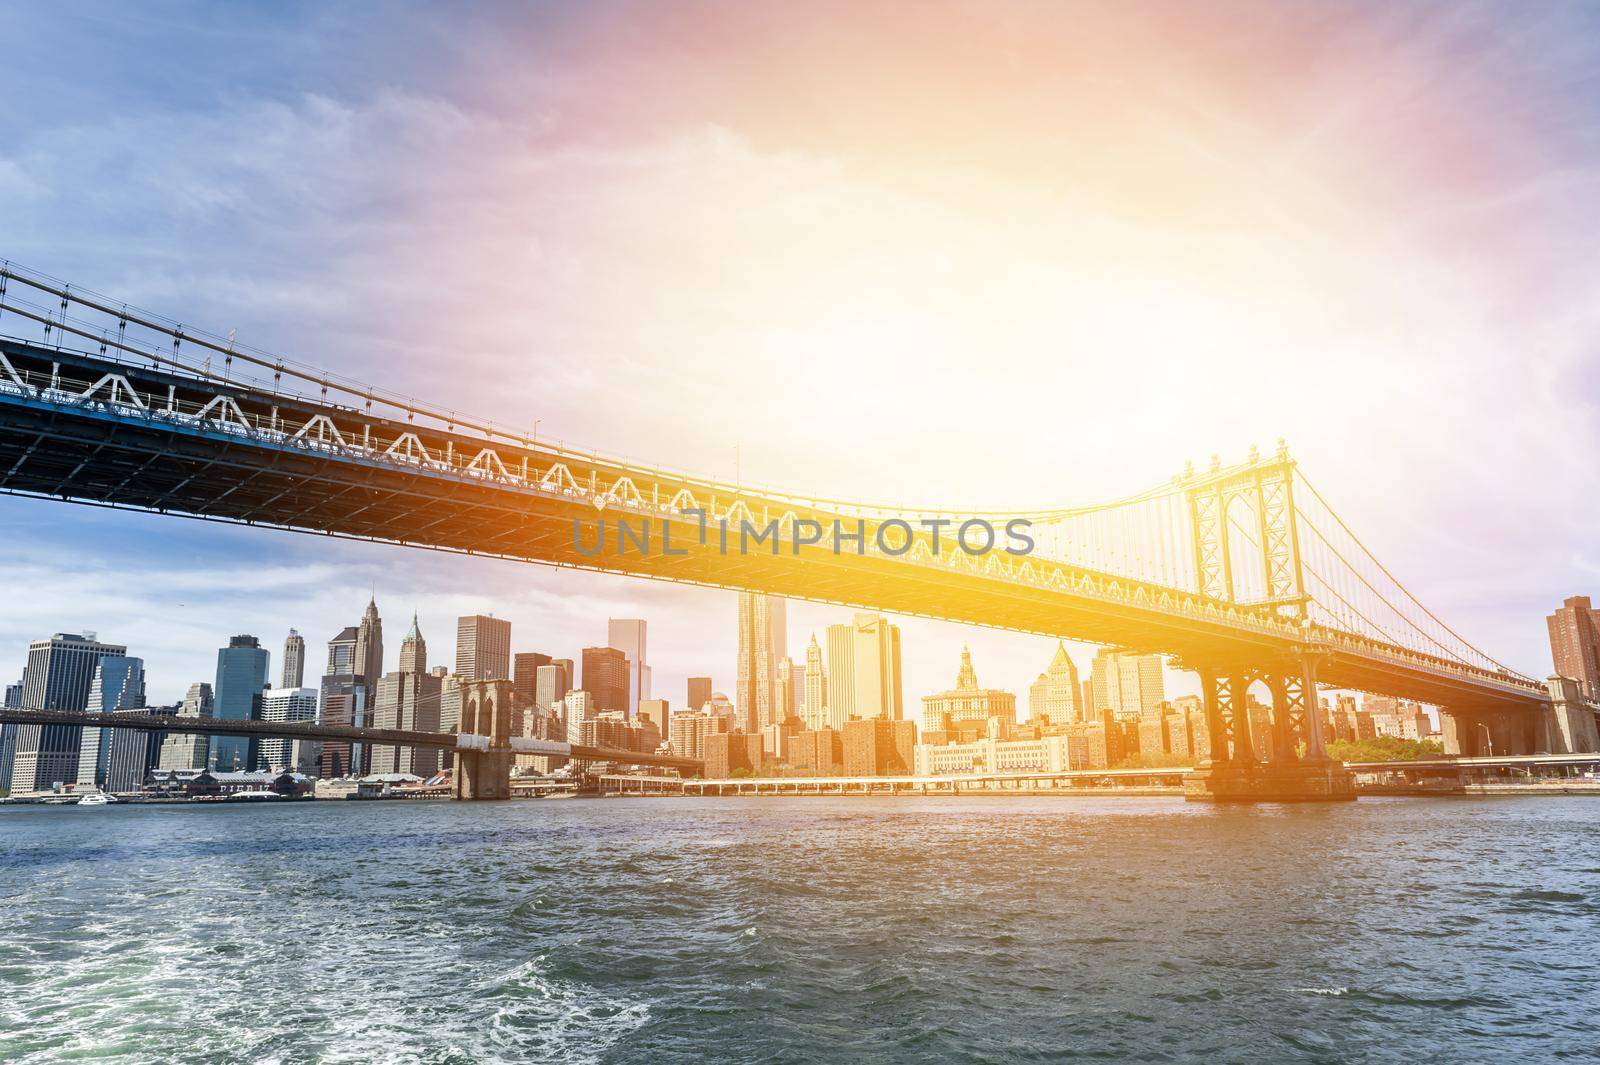 BNew York Skyline in the sunset by cla78